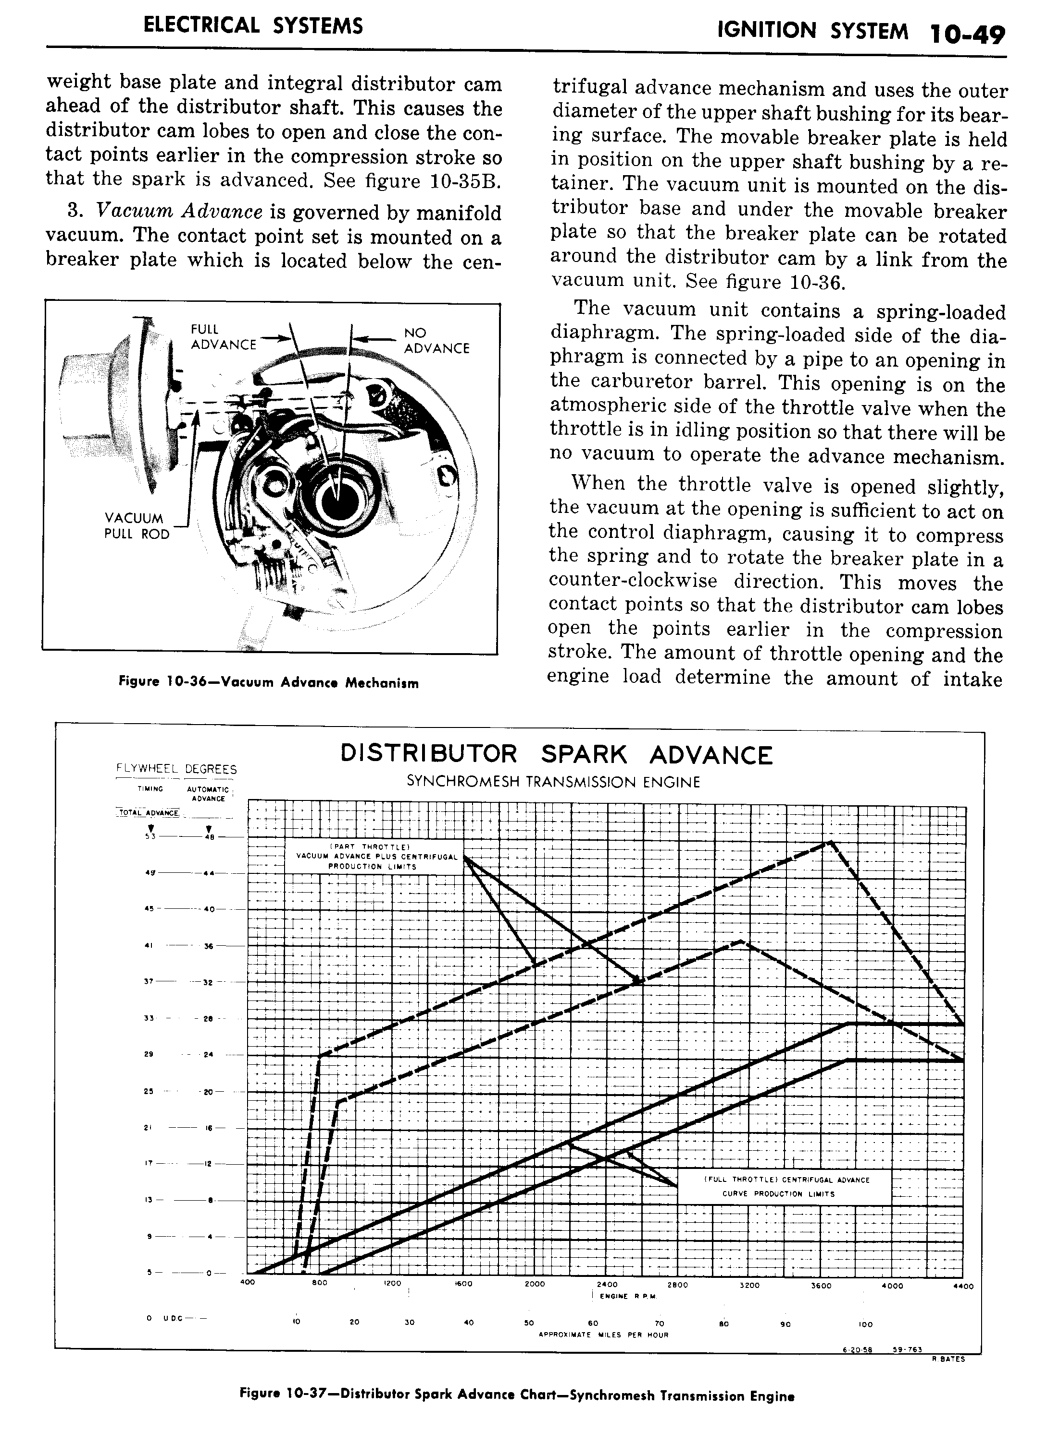 n_11 1960 Buick Shop Manual - Electrical Systems-049-049.jpg